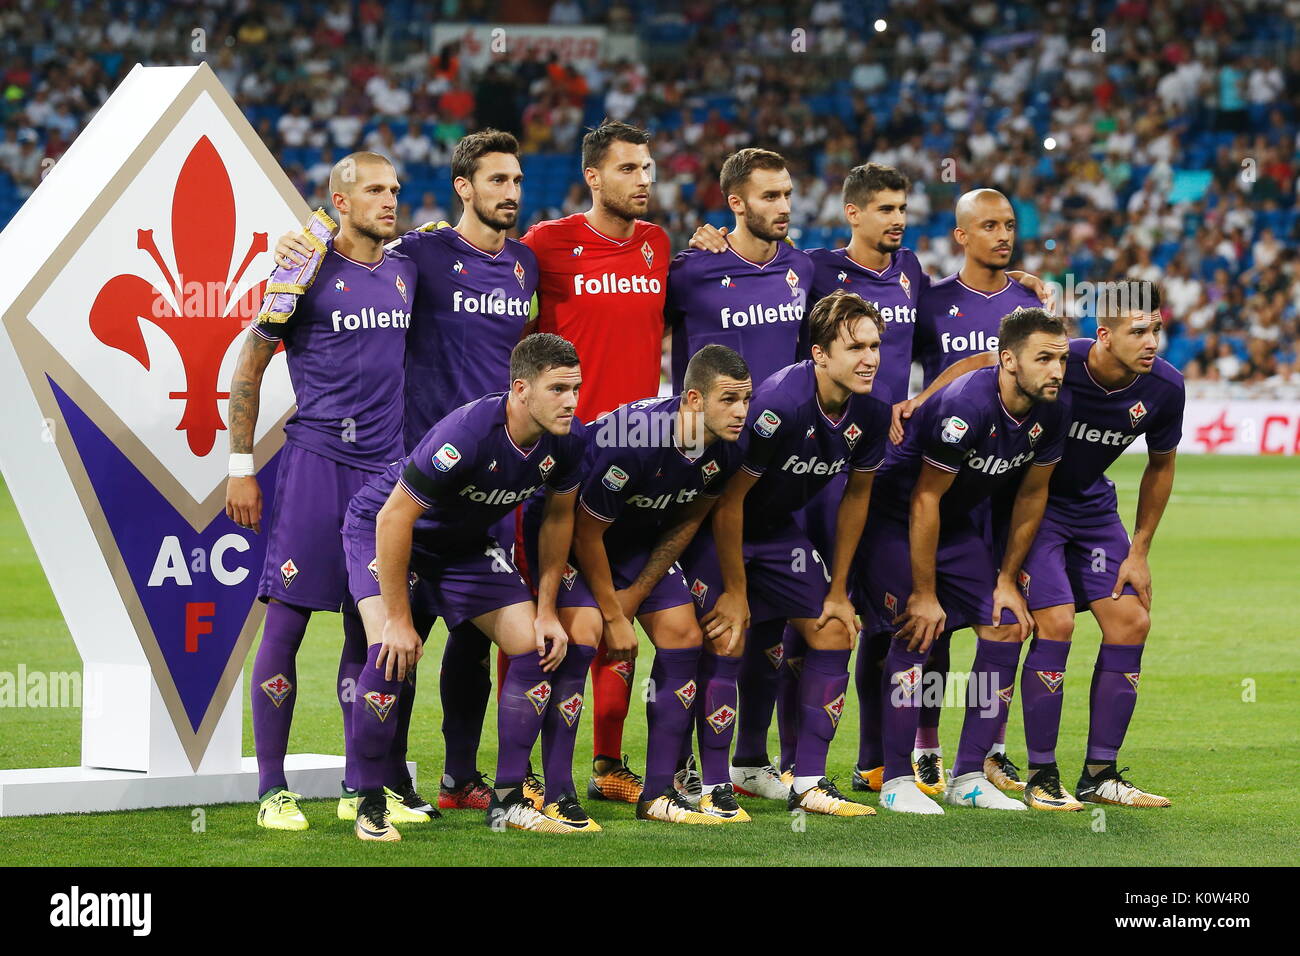 Acf fiorentina hi-res stock photography and images - Alamy